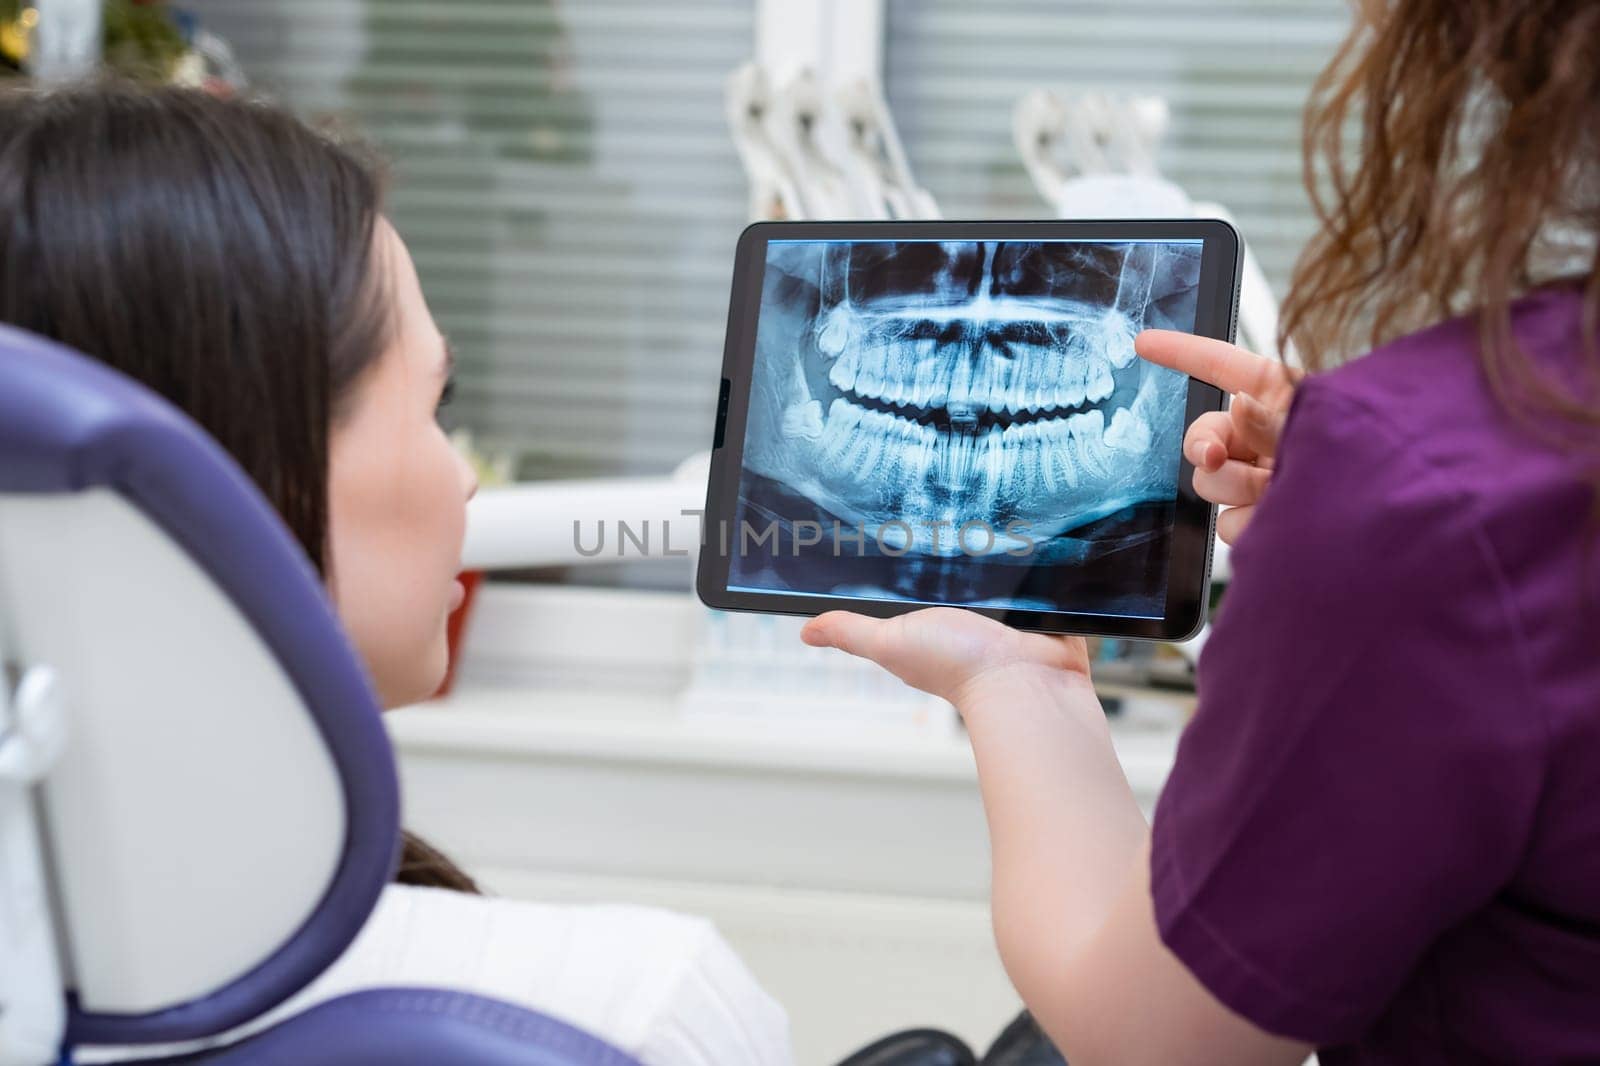 Dentist presents the patient with an X-ray and engages in a discussion about treatment options